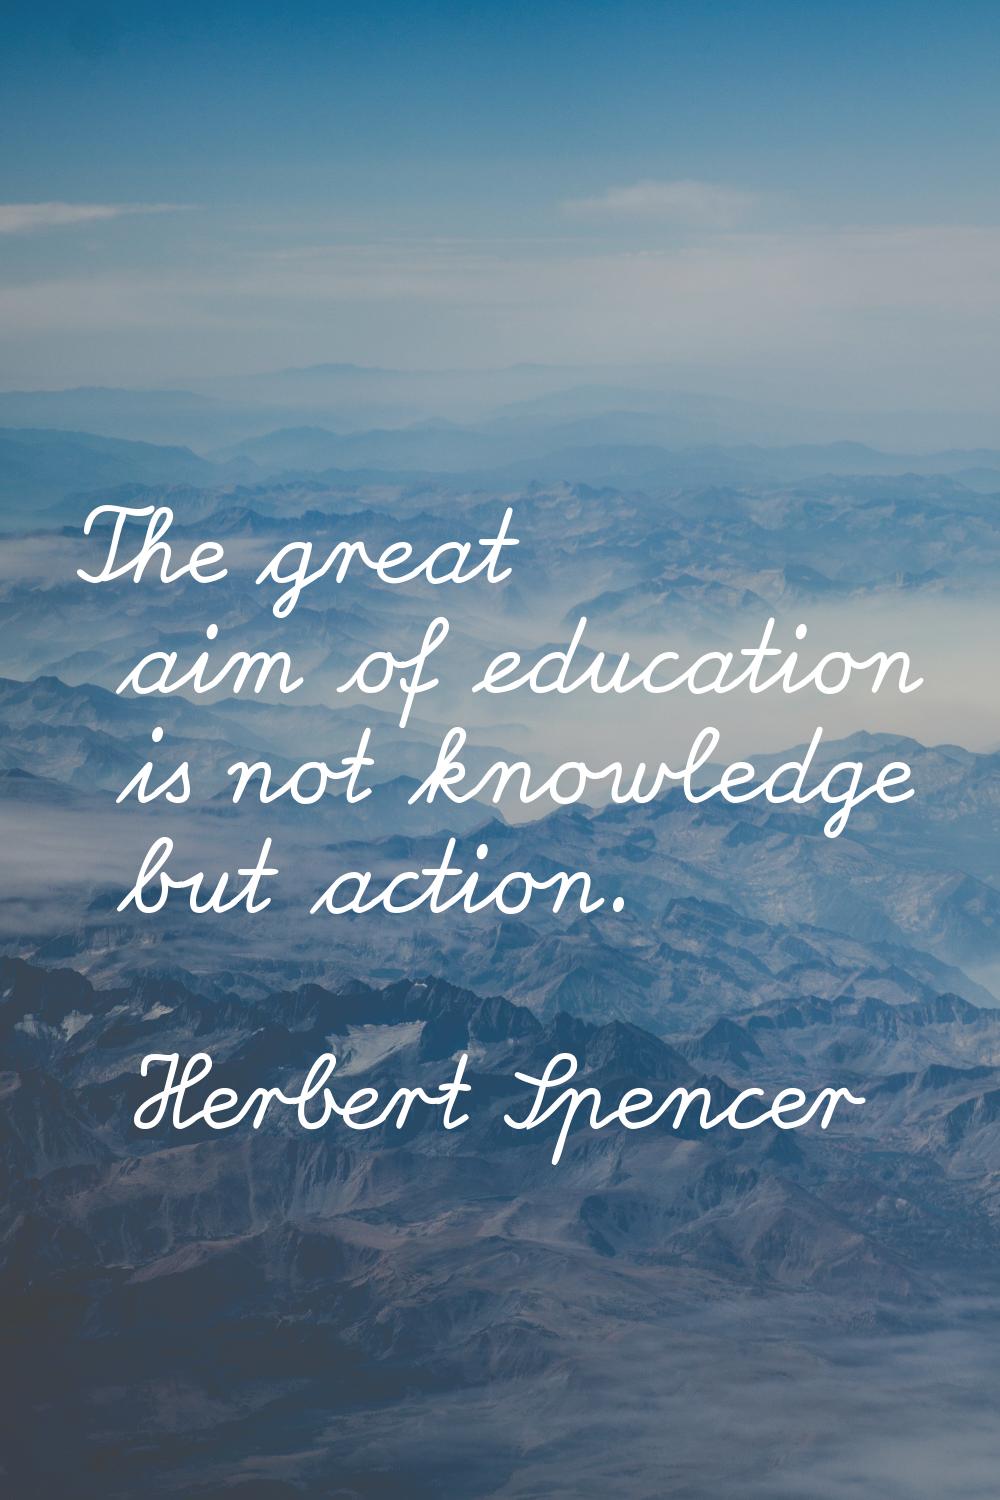 The great aim of education is not knowledge but action.